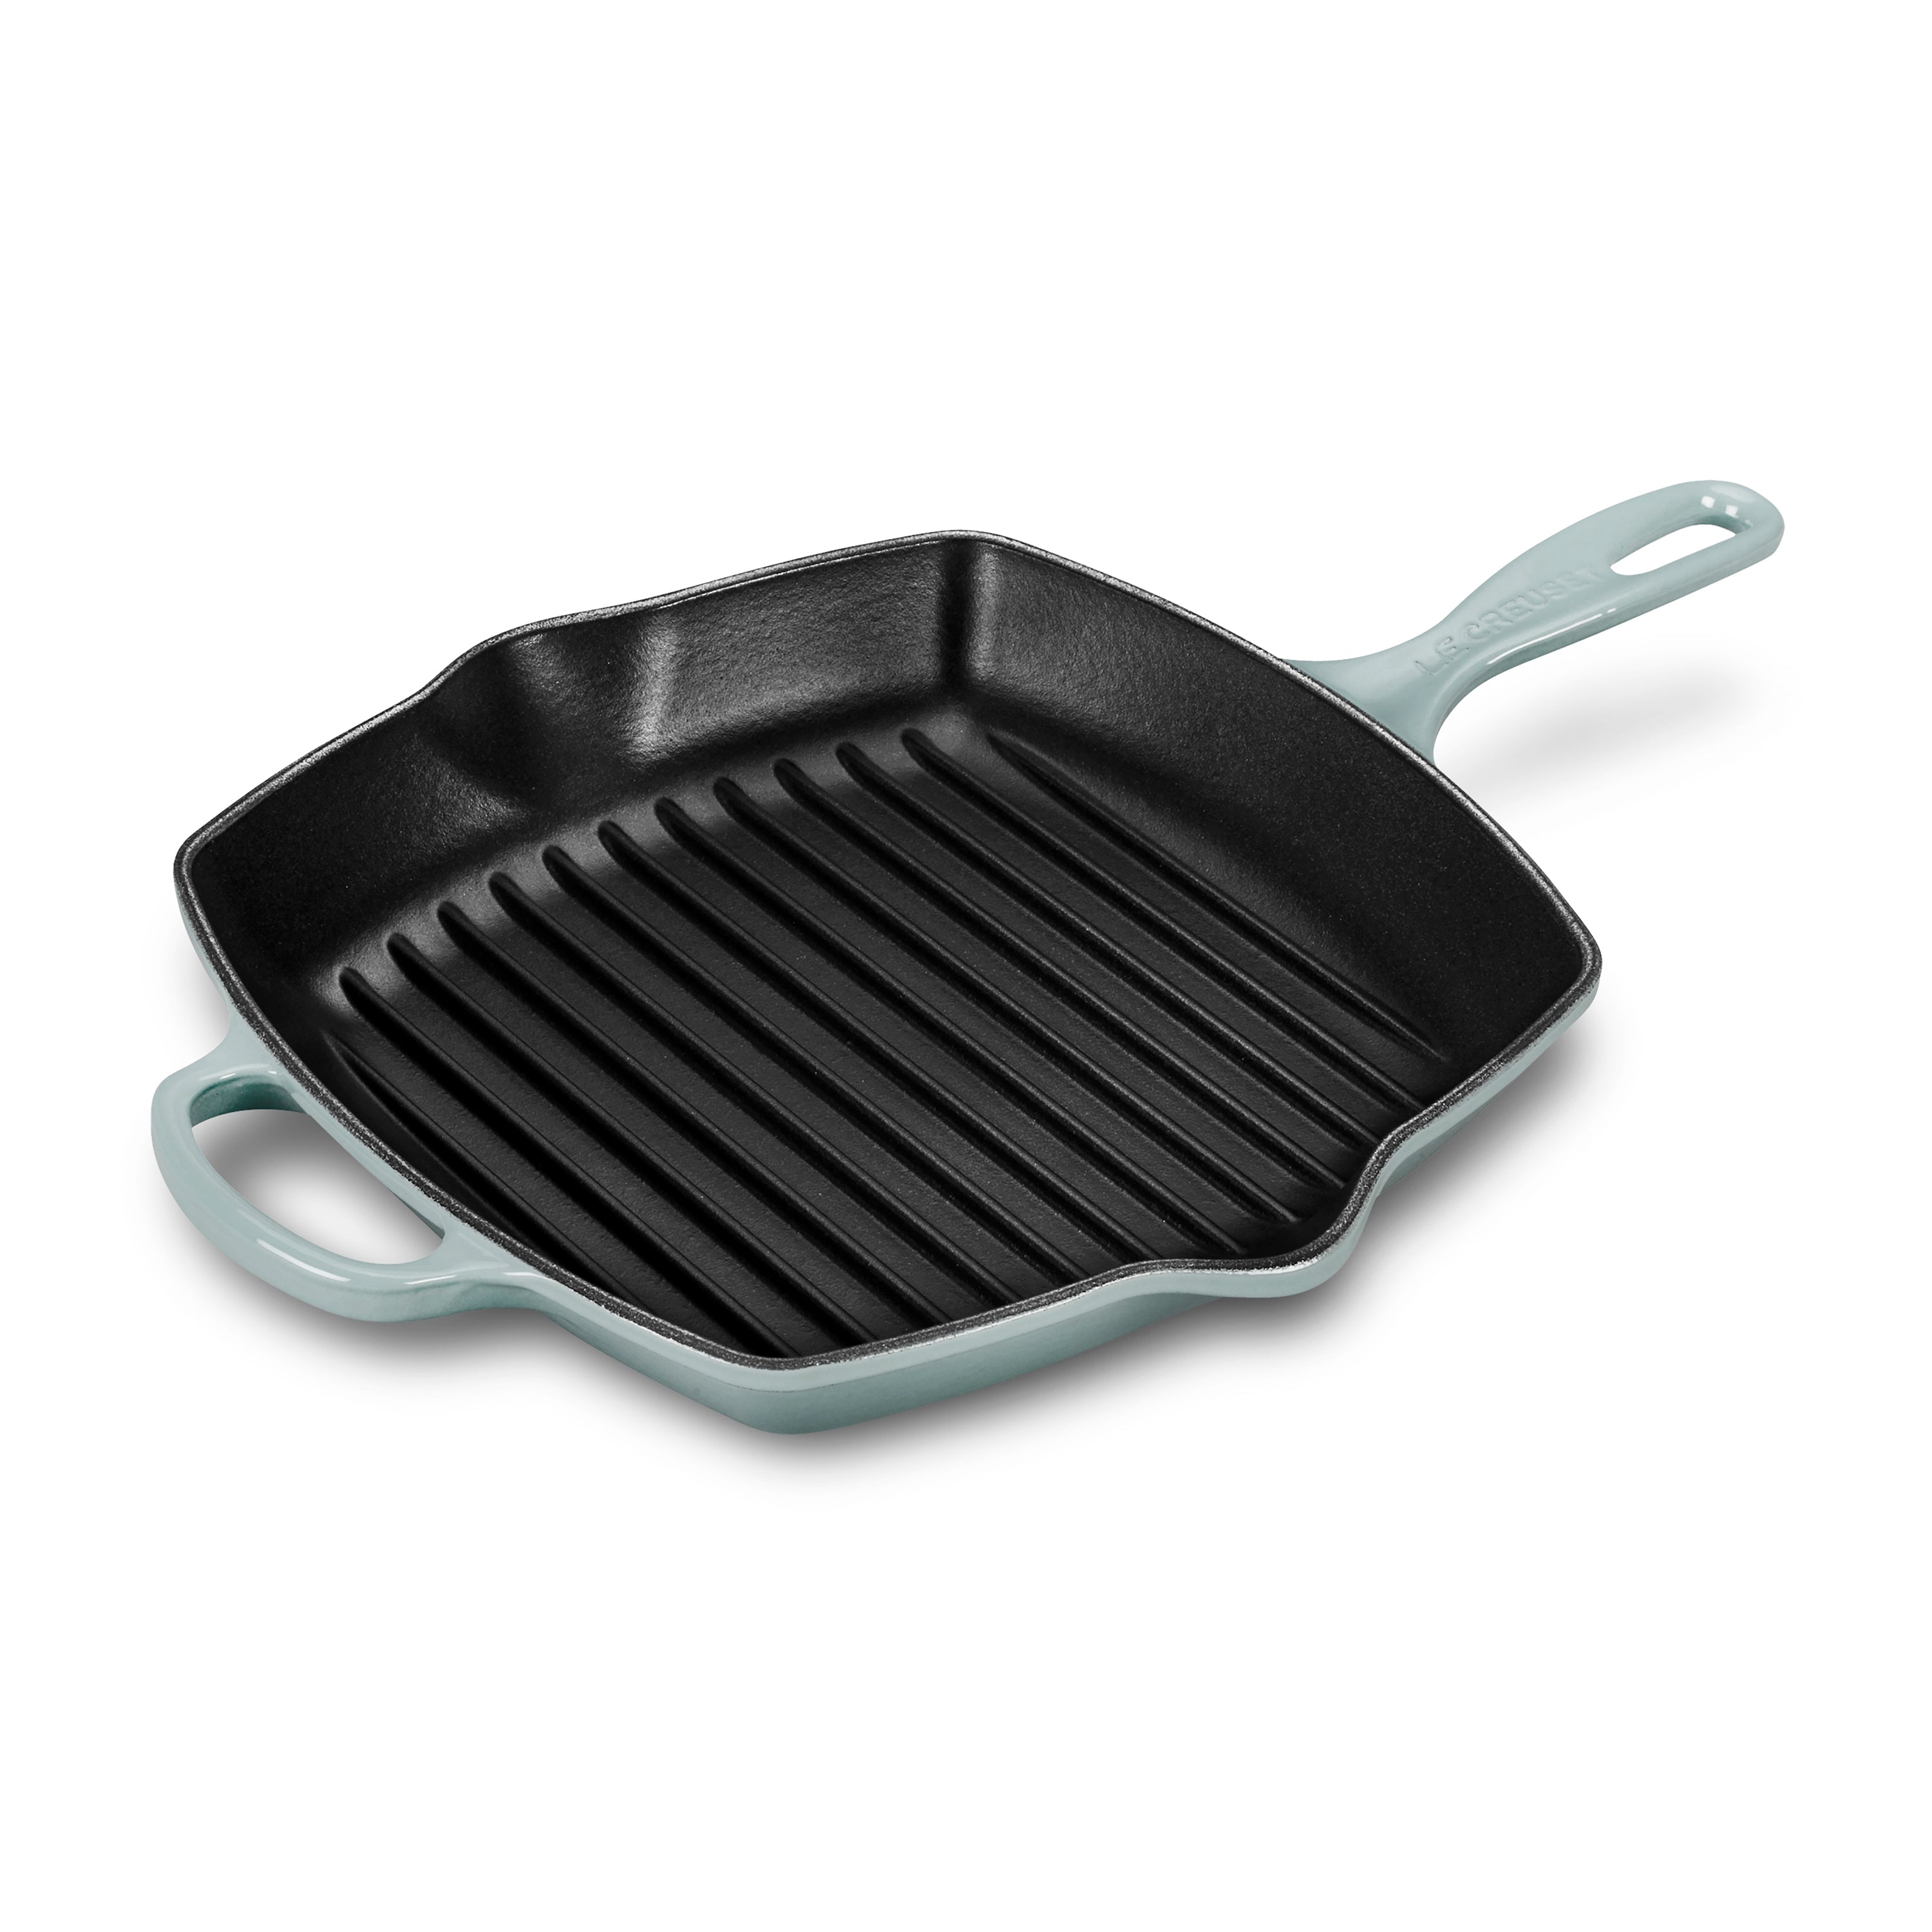  Le Creuset Enameled Cast Iron Signature Square Skillet Grill,  10.25, Flame: Home & Kitchen